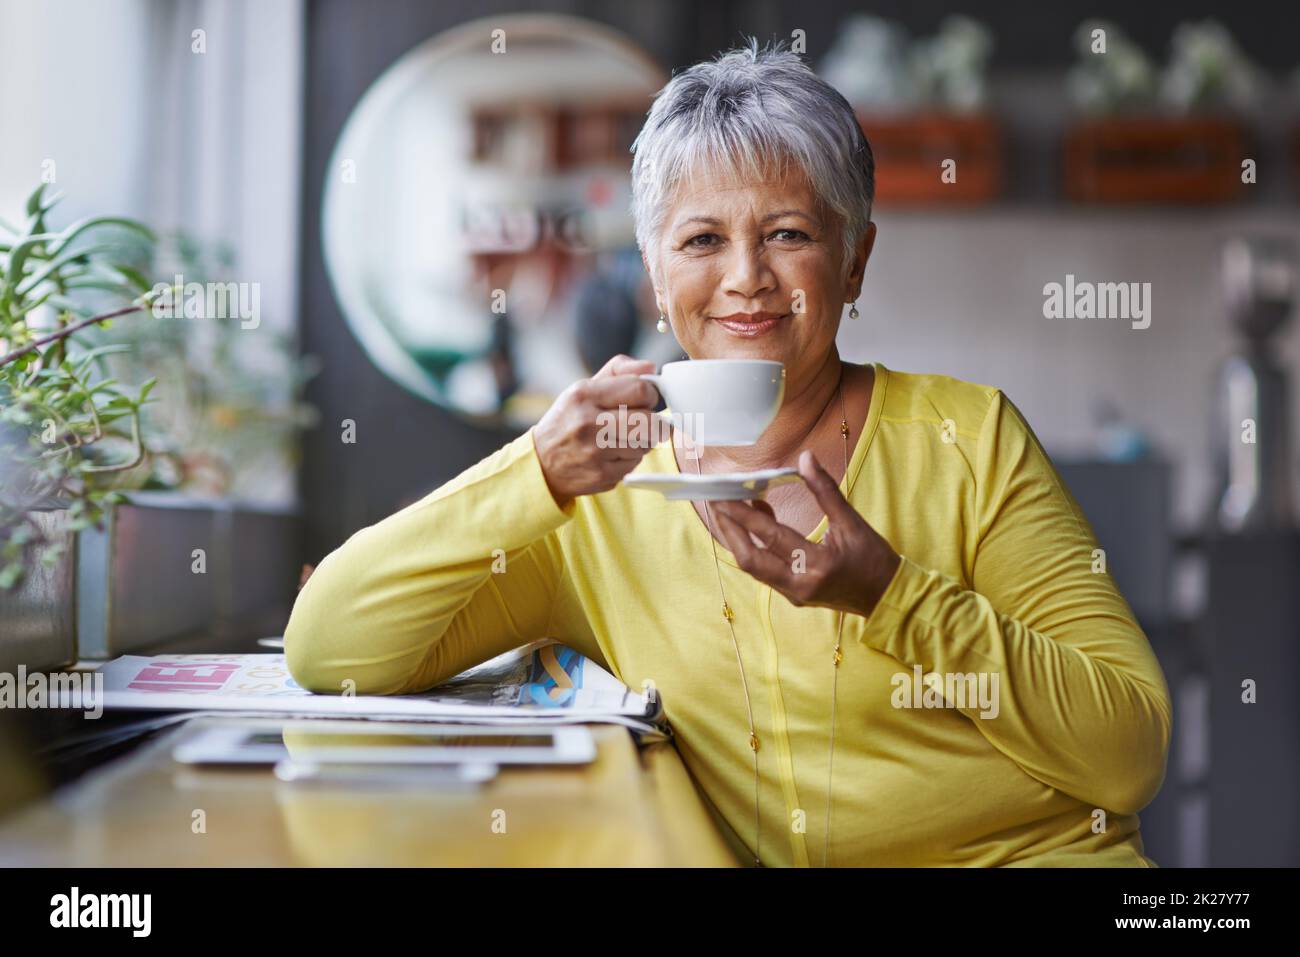 This is my favourite coffee shop. Portrait of a mature woman enjoying a warm beverage at a coffee shop. Stock Photo